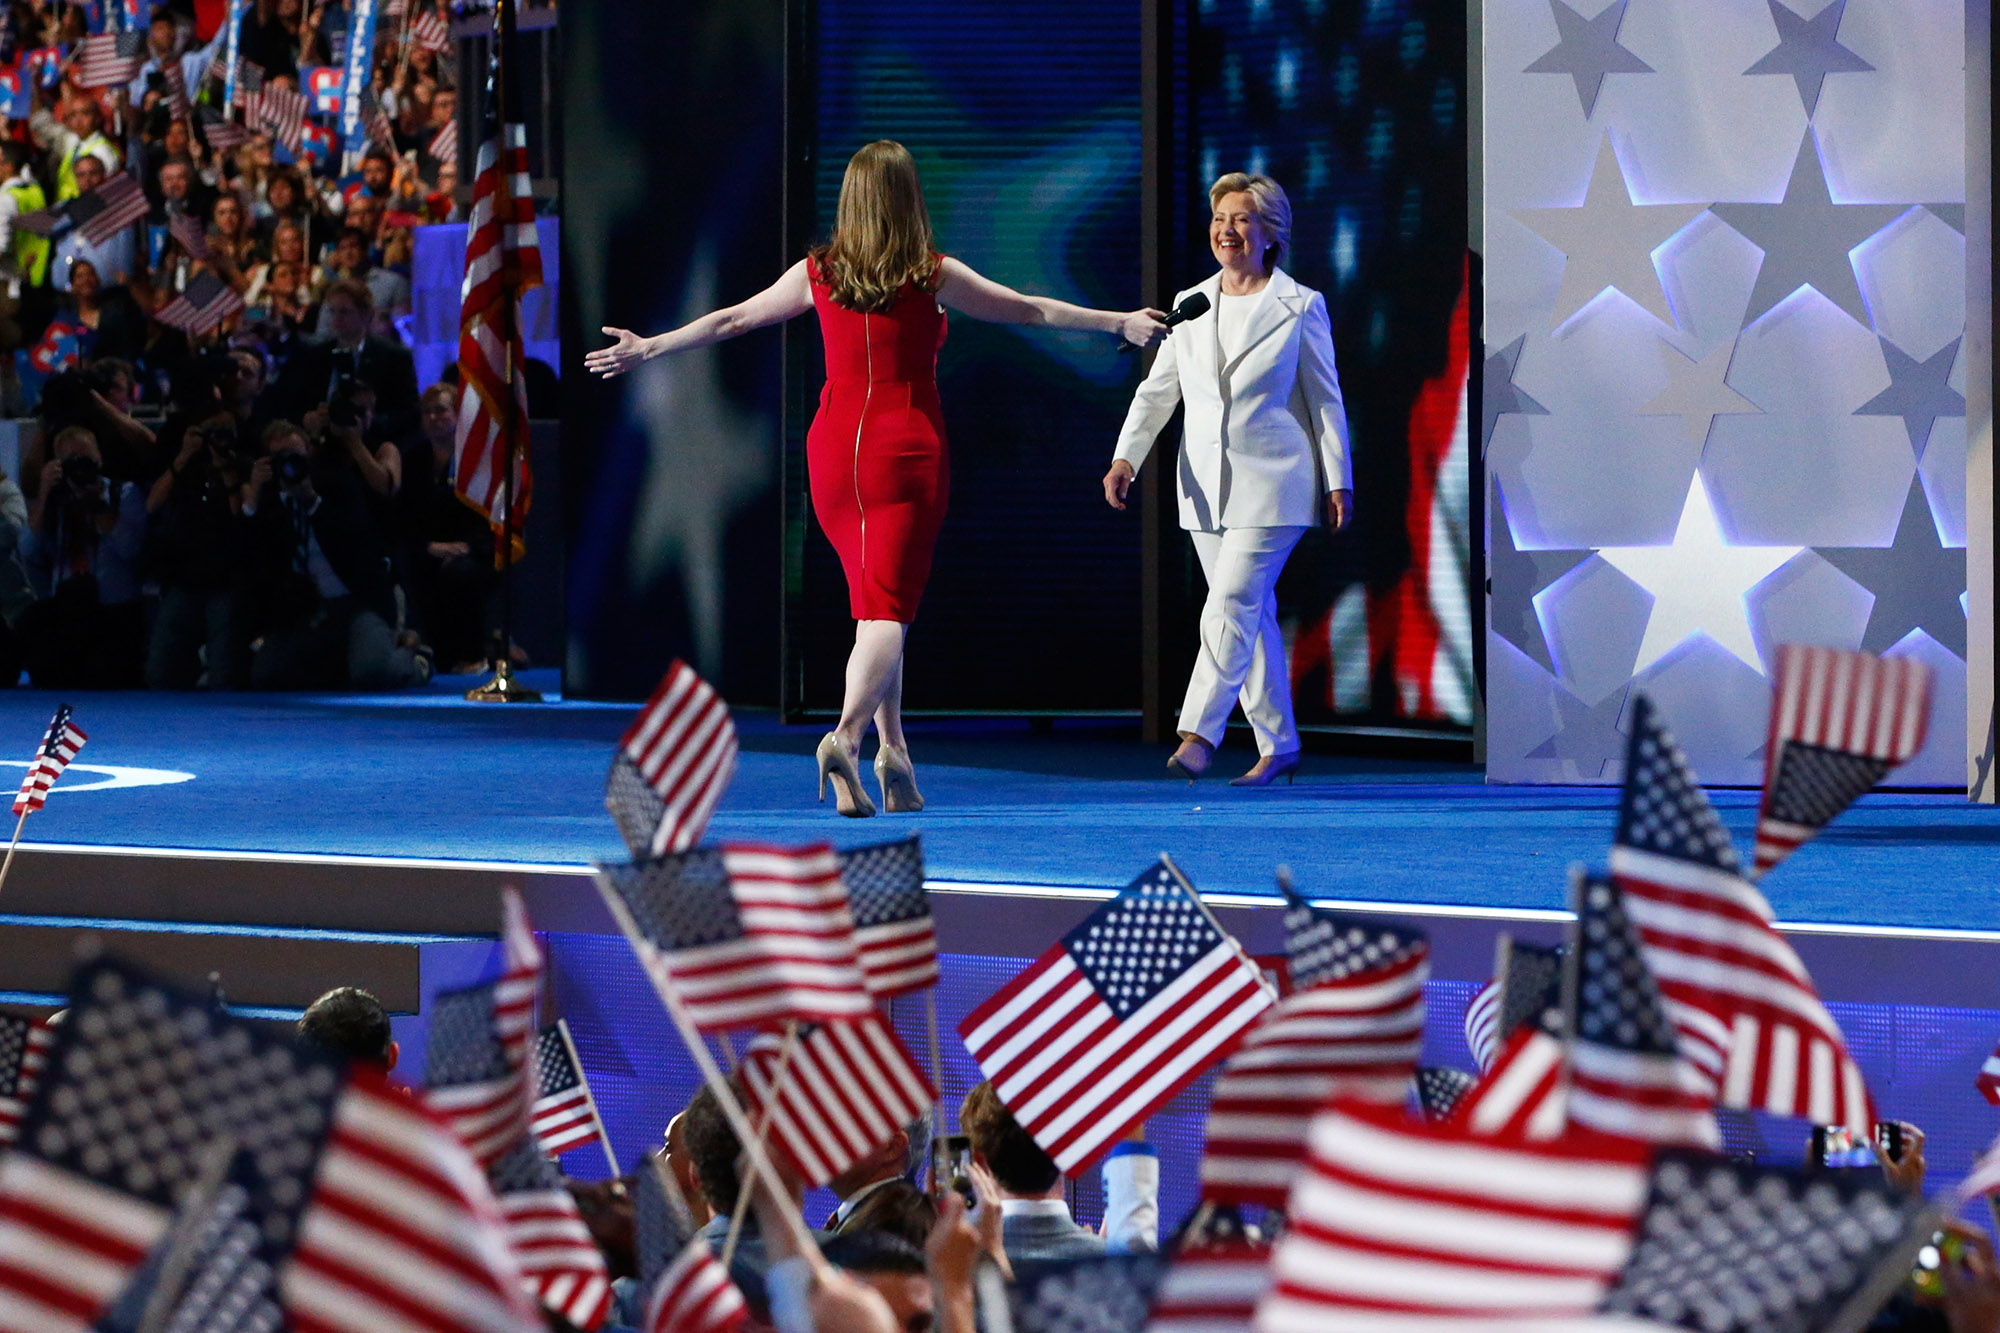 PHOTO: Democratic presidential nominee Hillary Clinton arrives on stage after her daughter Chelsea Clinton introduced her on the fourth day of the Democratic National Convention, July 28, 2016 in Philadelphia.